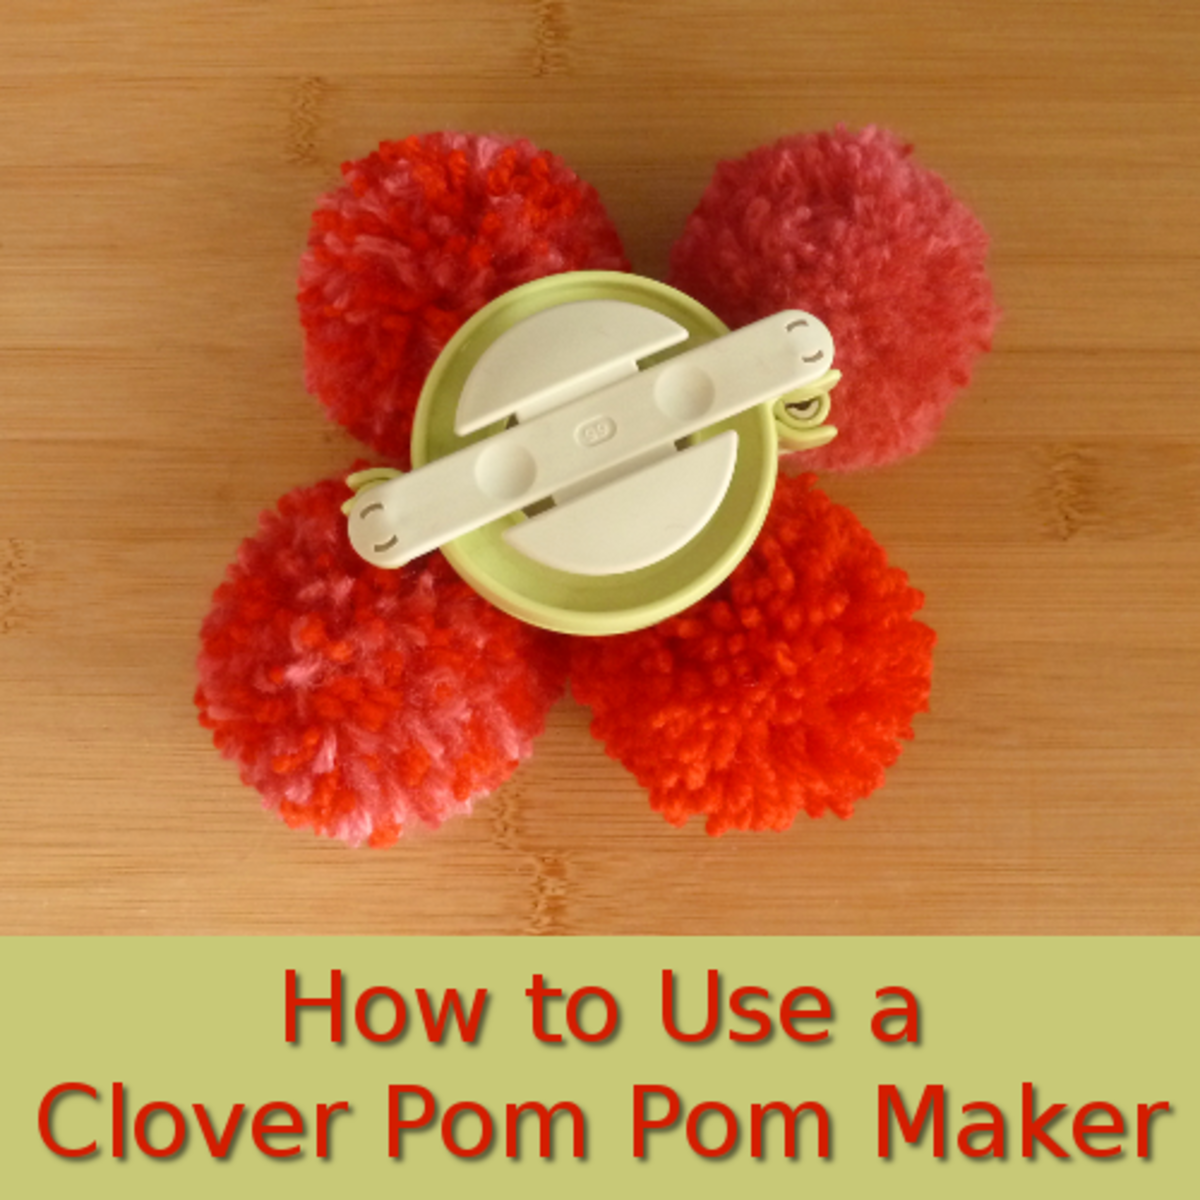 How to use a Clover pom pom maker - find out how this clever gadget works